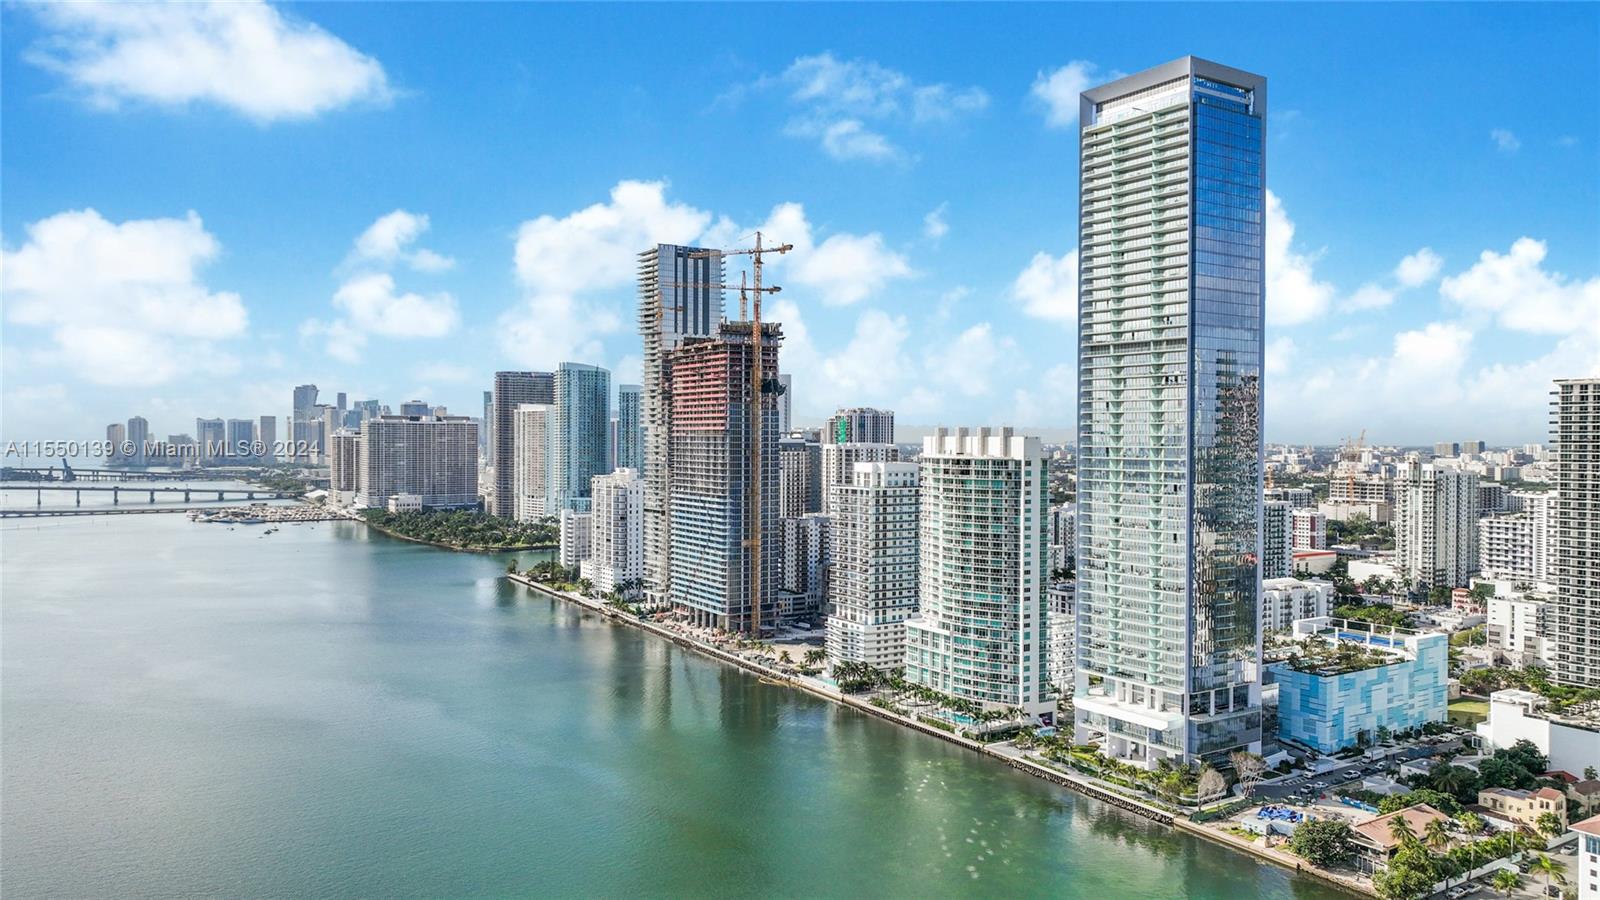 Discover the pinnacle of waterfront living in the vibrant Edgewater neighborhood of Miami at Missoni Baia. This ultra-modern property offers a unique fusion of luxury, art, and unmatched comfort, making it the perfect home for those seeking the ultimate Miami lifestyle at its' best. Wake up to breathtaking panoramic views of Biscayne Bay, the Atlantic Ocean, and the Miami skyline. Floor-to-ceiling windows and spacious balconies provide the perfect vantage point for enjoying the sunrise and sunset. Enjoy the convenience and privacy of direct elevator access to your residence, ensuring a seamless transition from the world outside to the comfort of your home. It is designed for those who appreciate an active, social and vibrant urban lifestyle while living in a serene waterfront retreat.